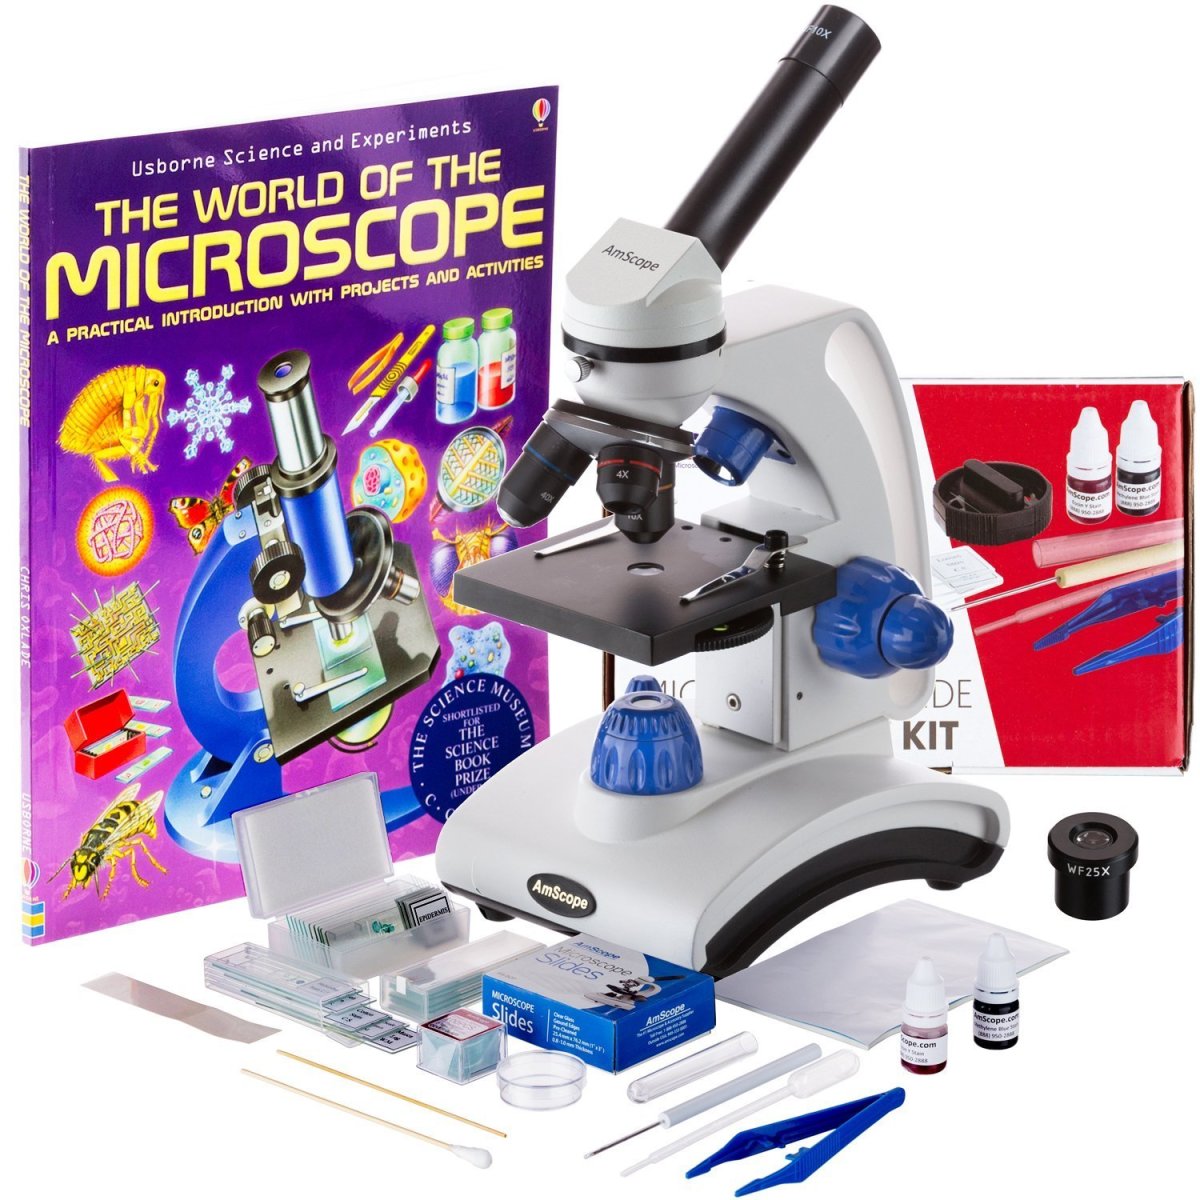 Review and overview of the AmScope 40X-1000X Beginners Microscope Kit for Kids & Students